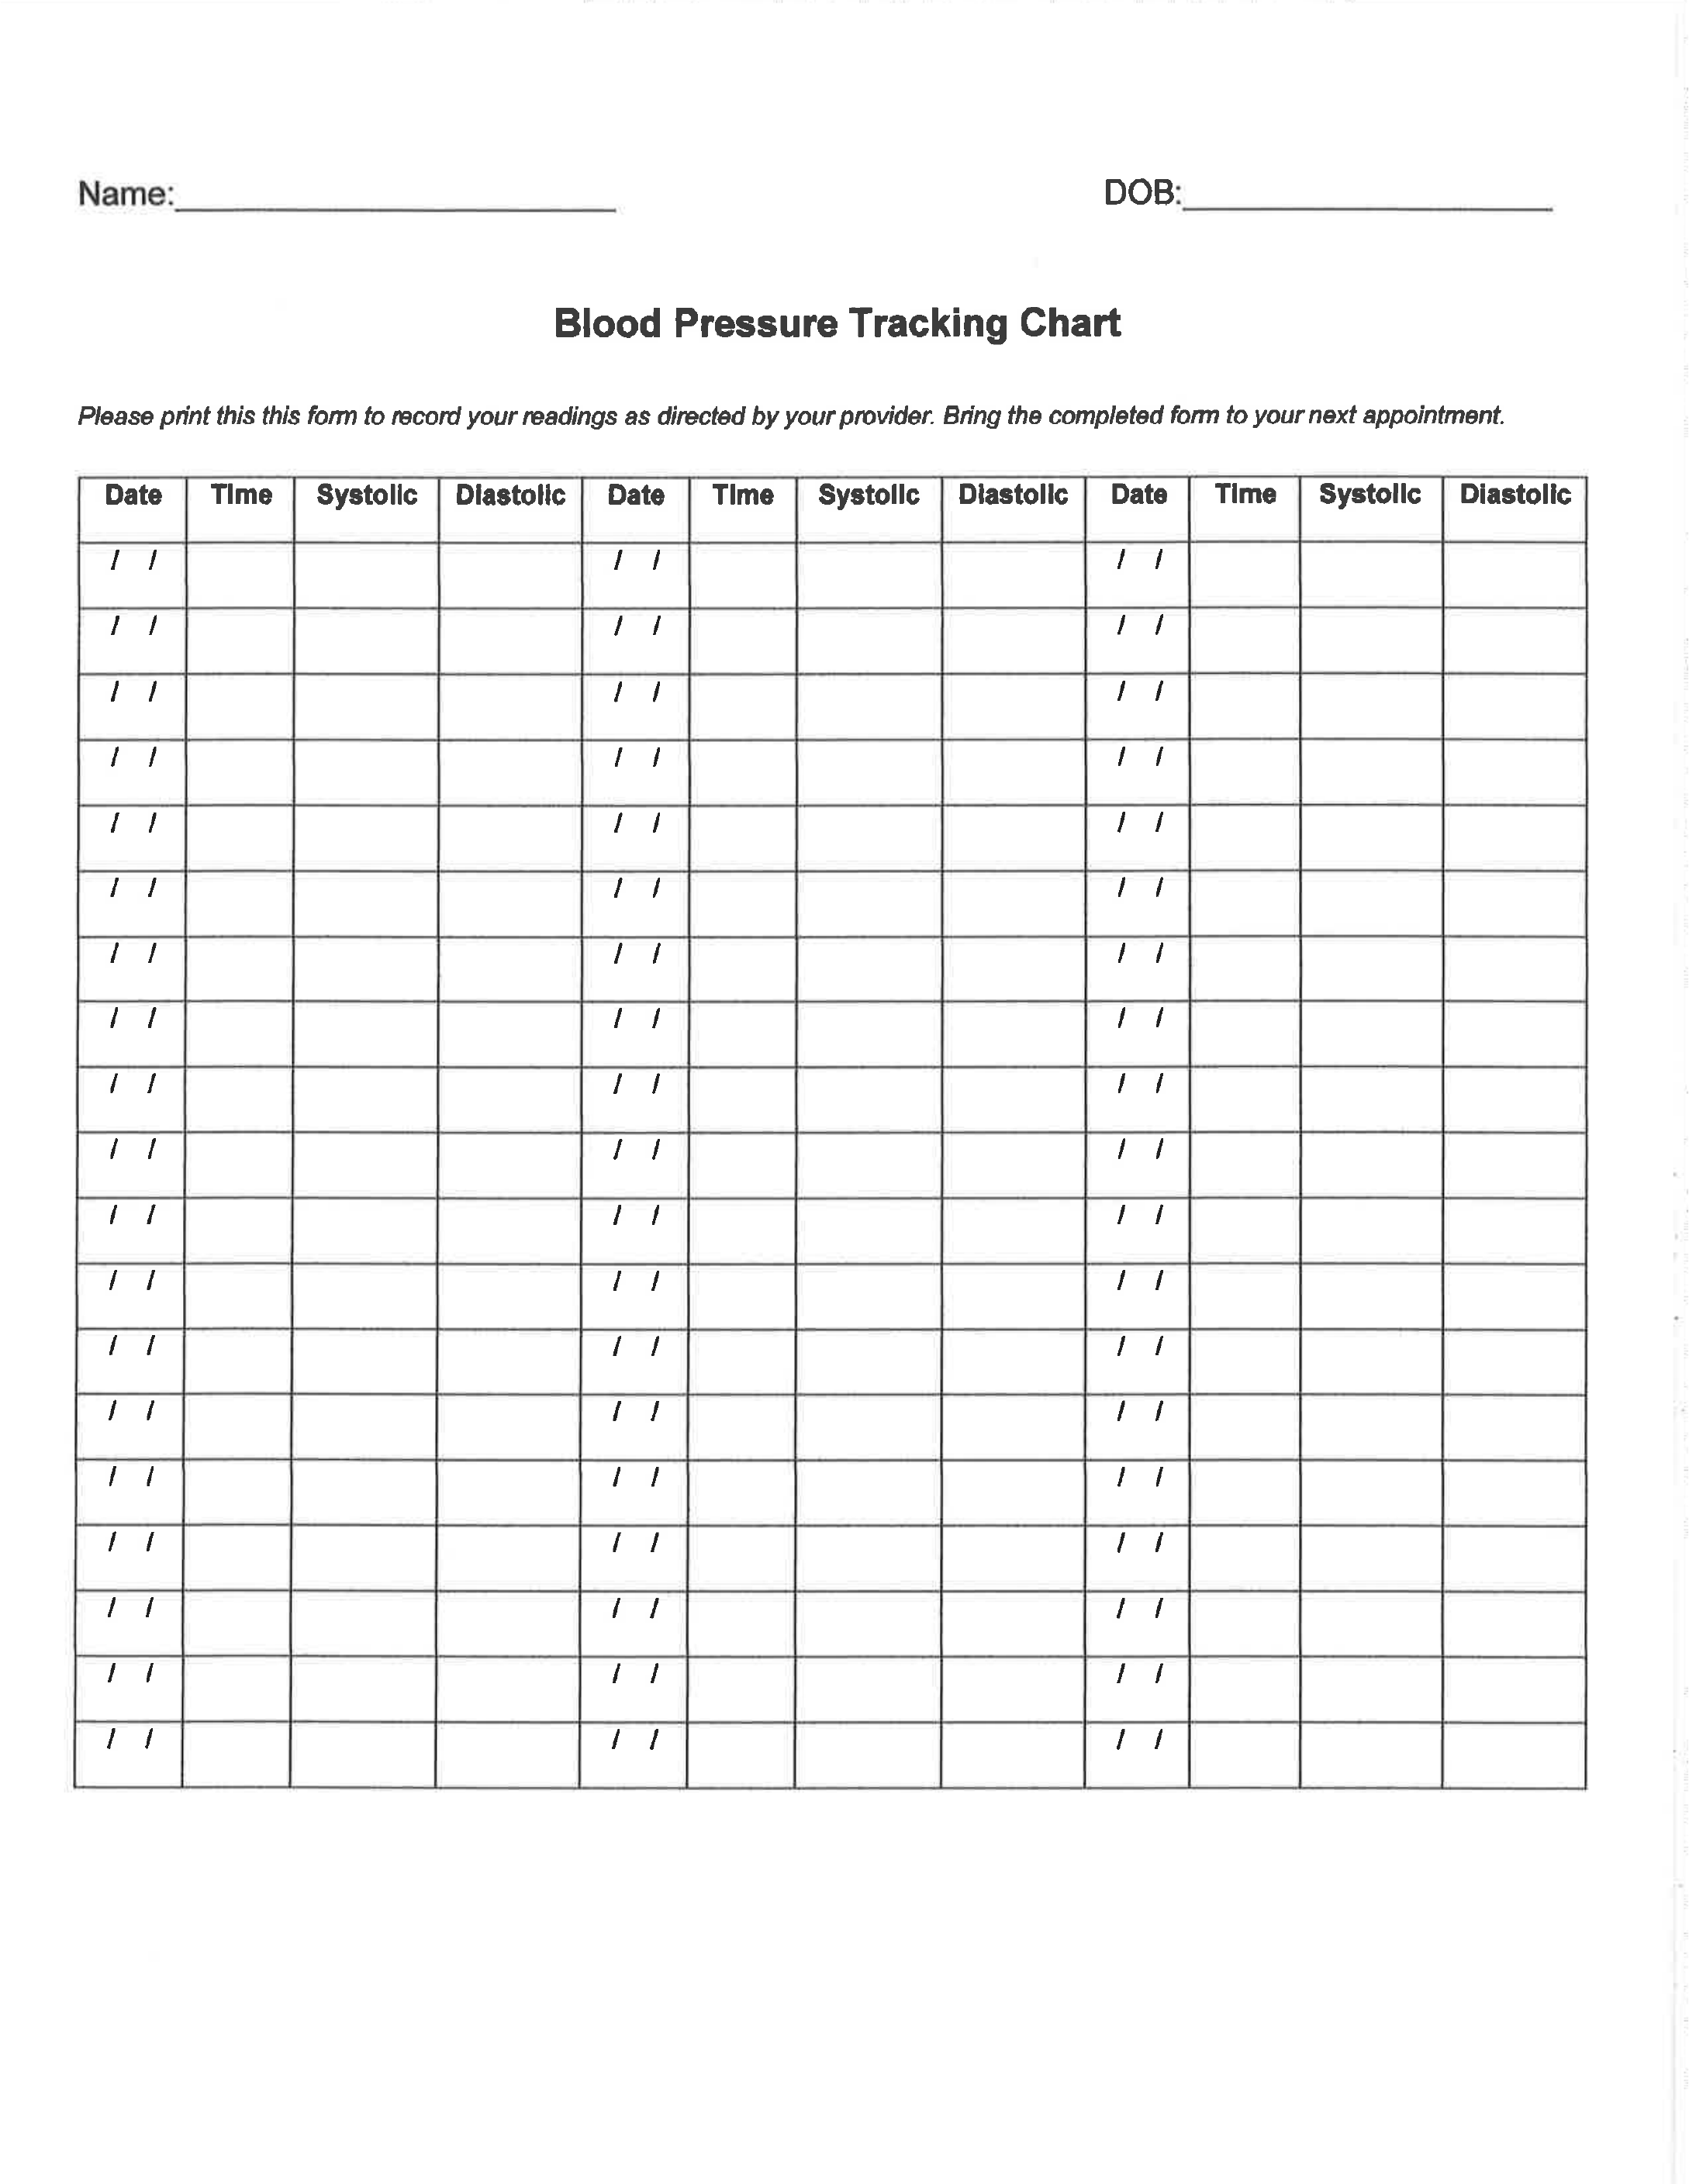 monthly-blood-pressure-chart-printable